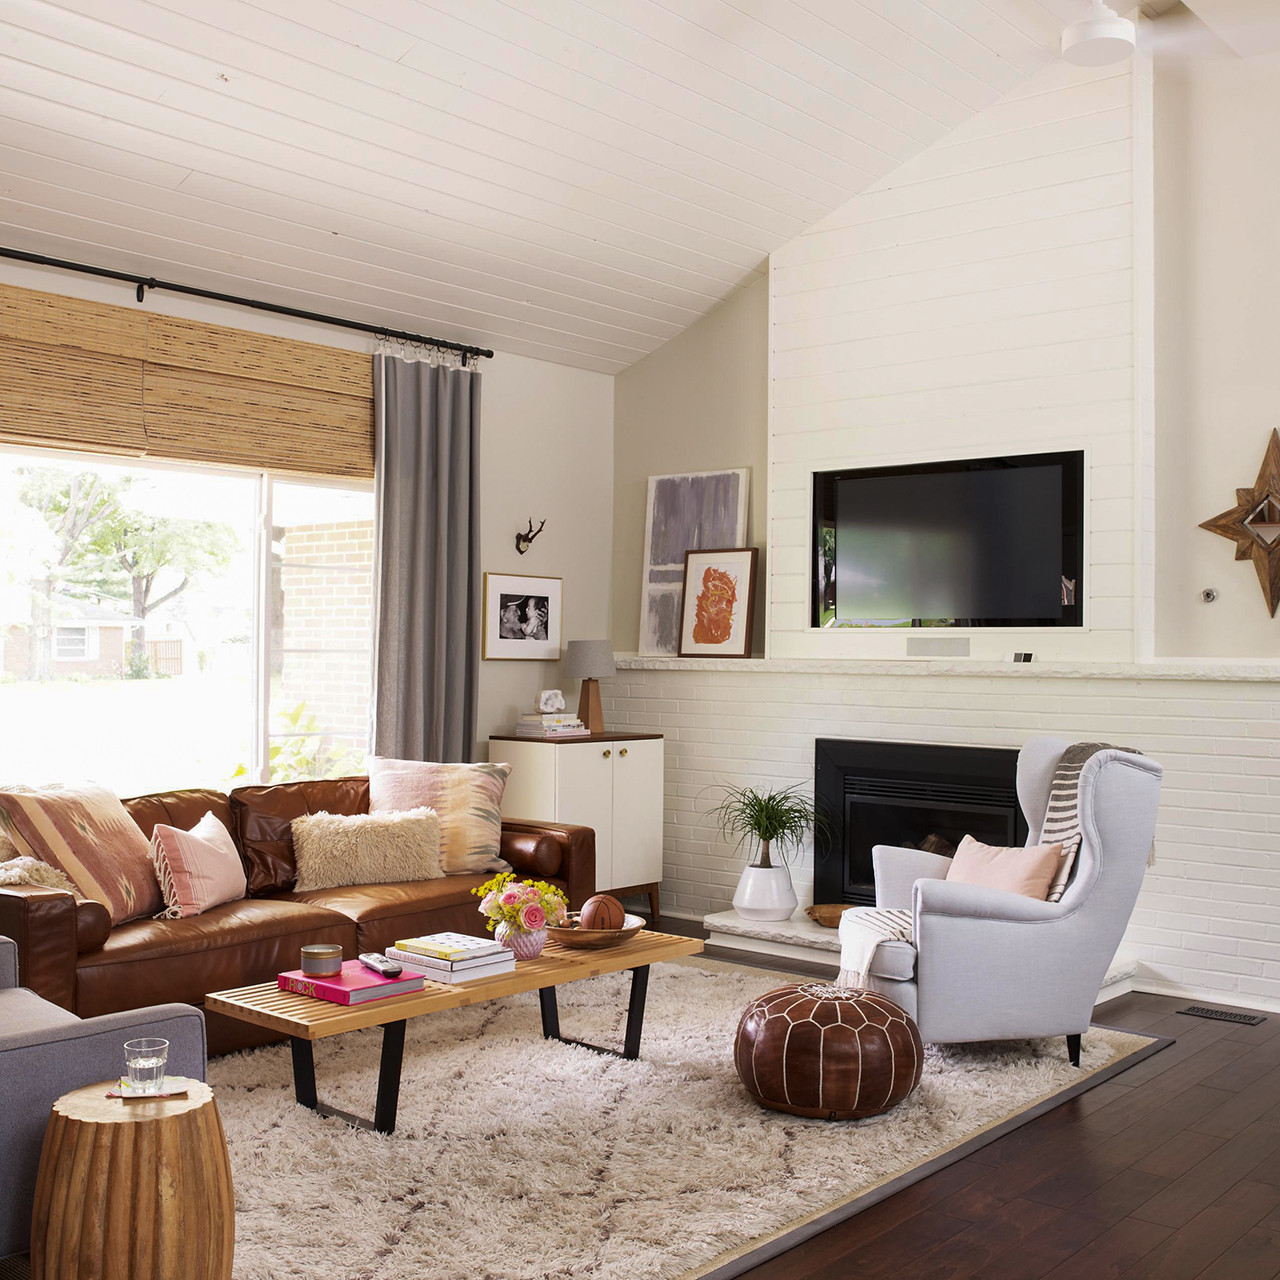 Brown Couches Living Room Ideas
 Our Favorite Ways to Decorate with a Brown Sofa